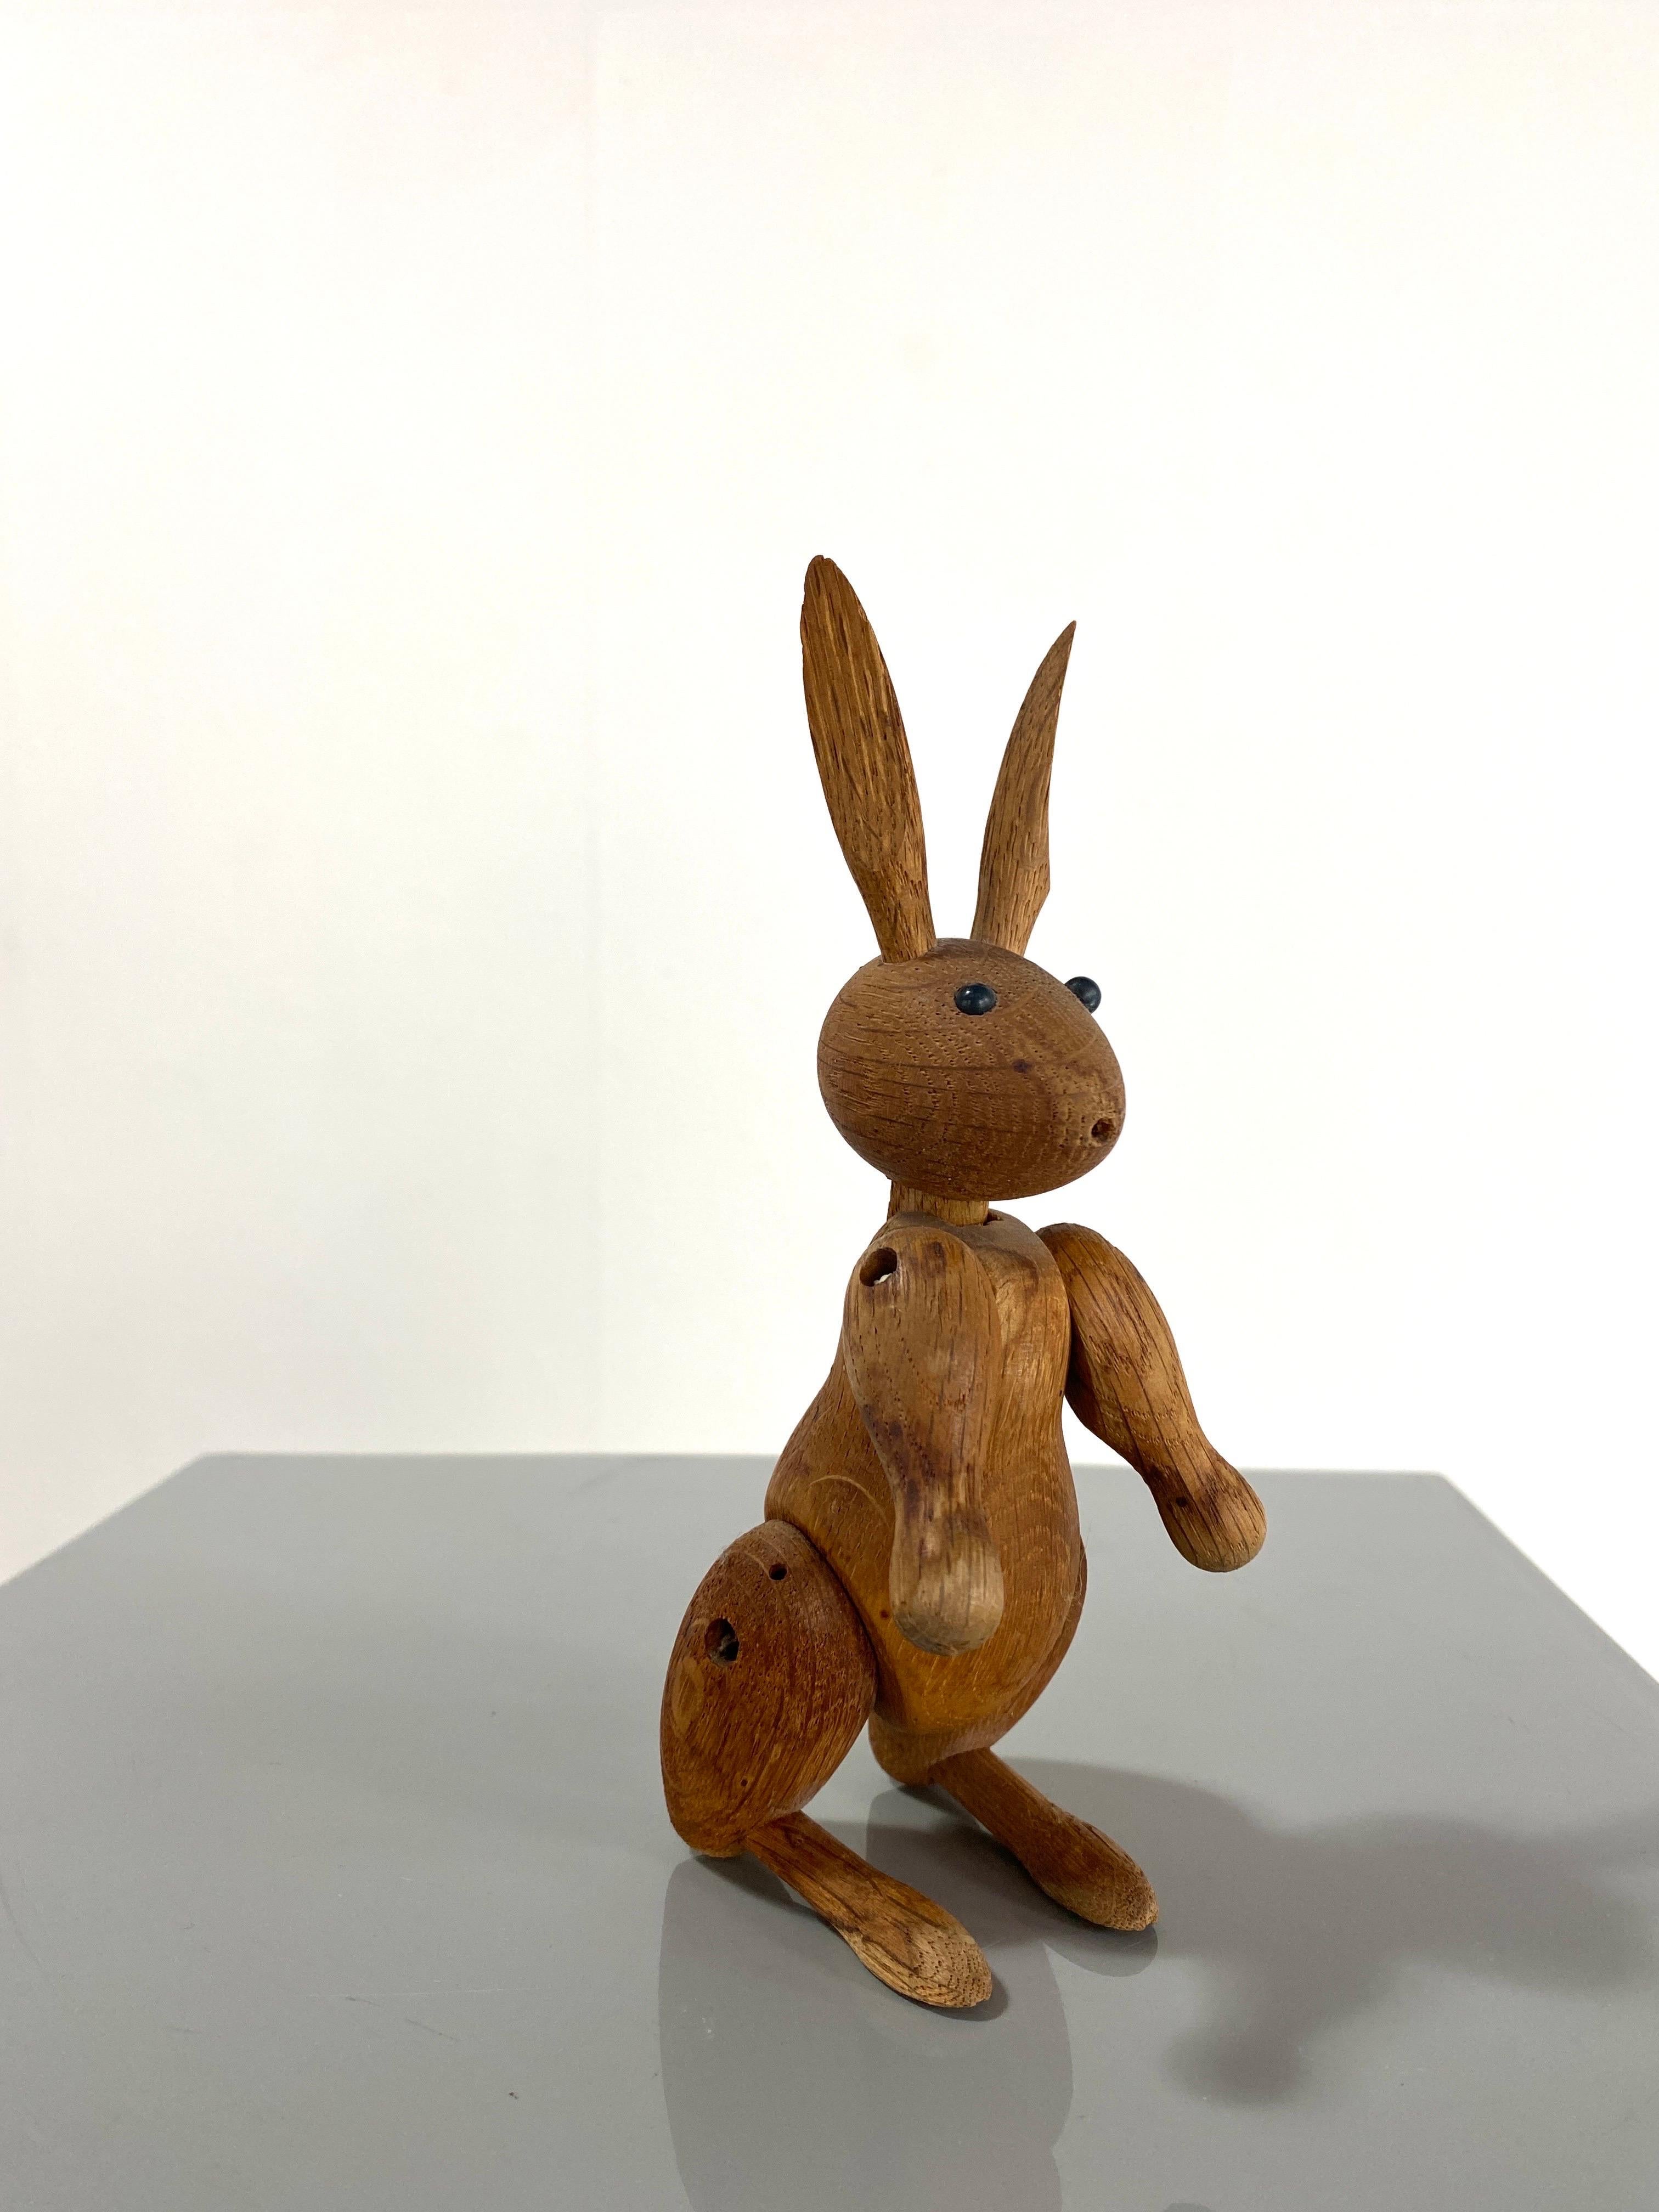 Vintage Rabbit Figurine by Kay Bojesen, It Was Designed in 1957, This is an Exam 3